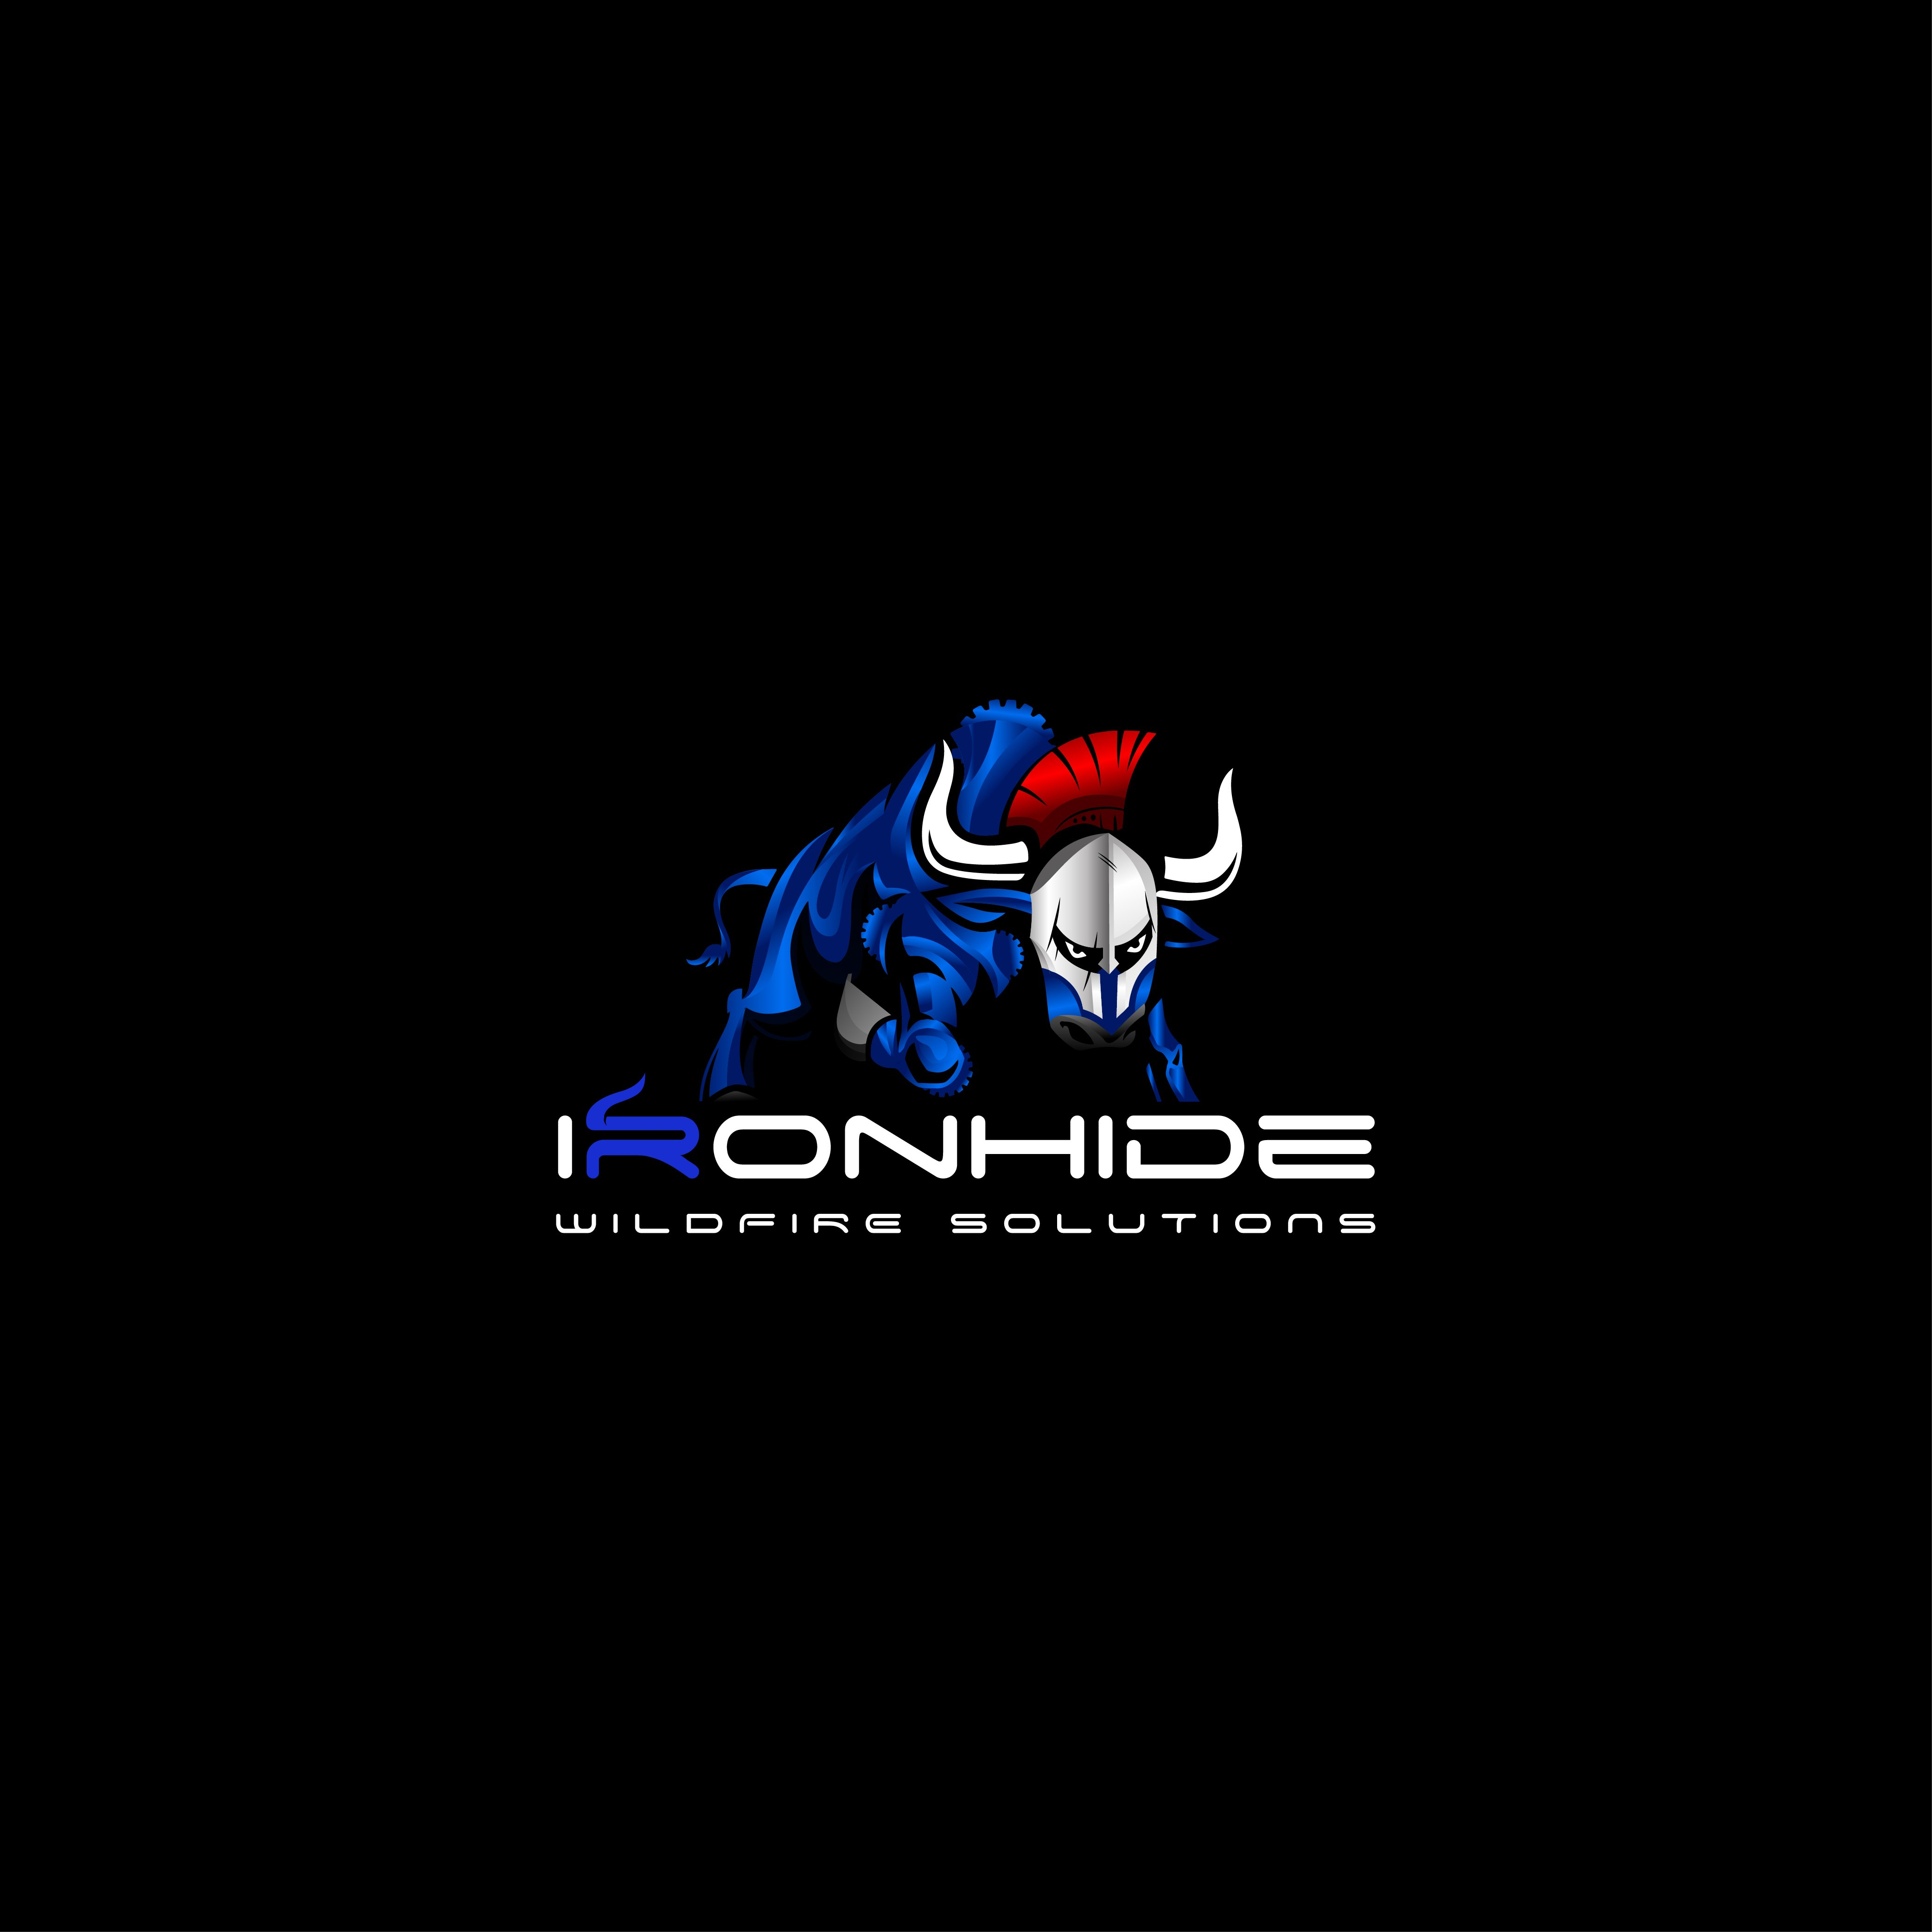  IRONHIDE WILDFIRE SOLUTIONS